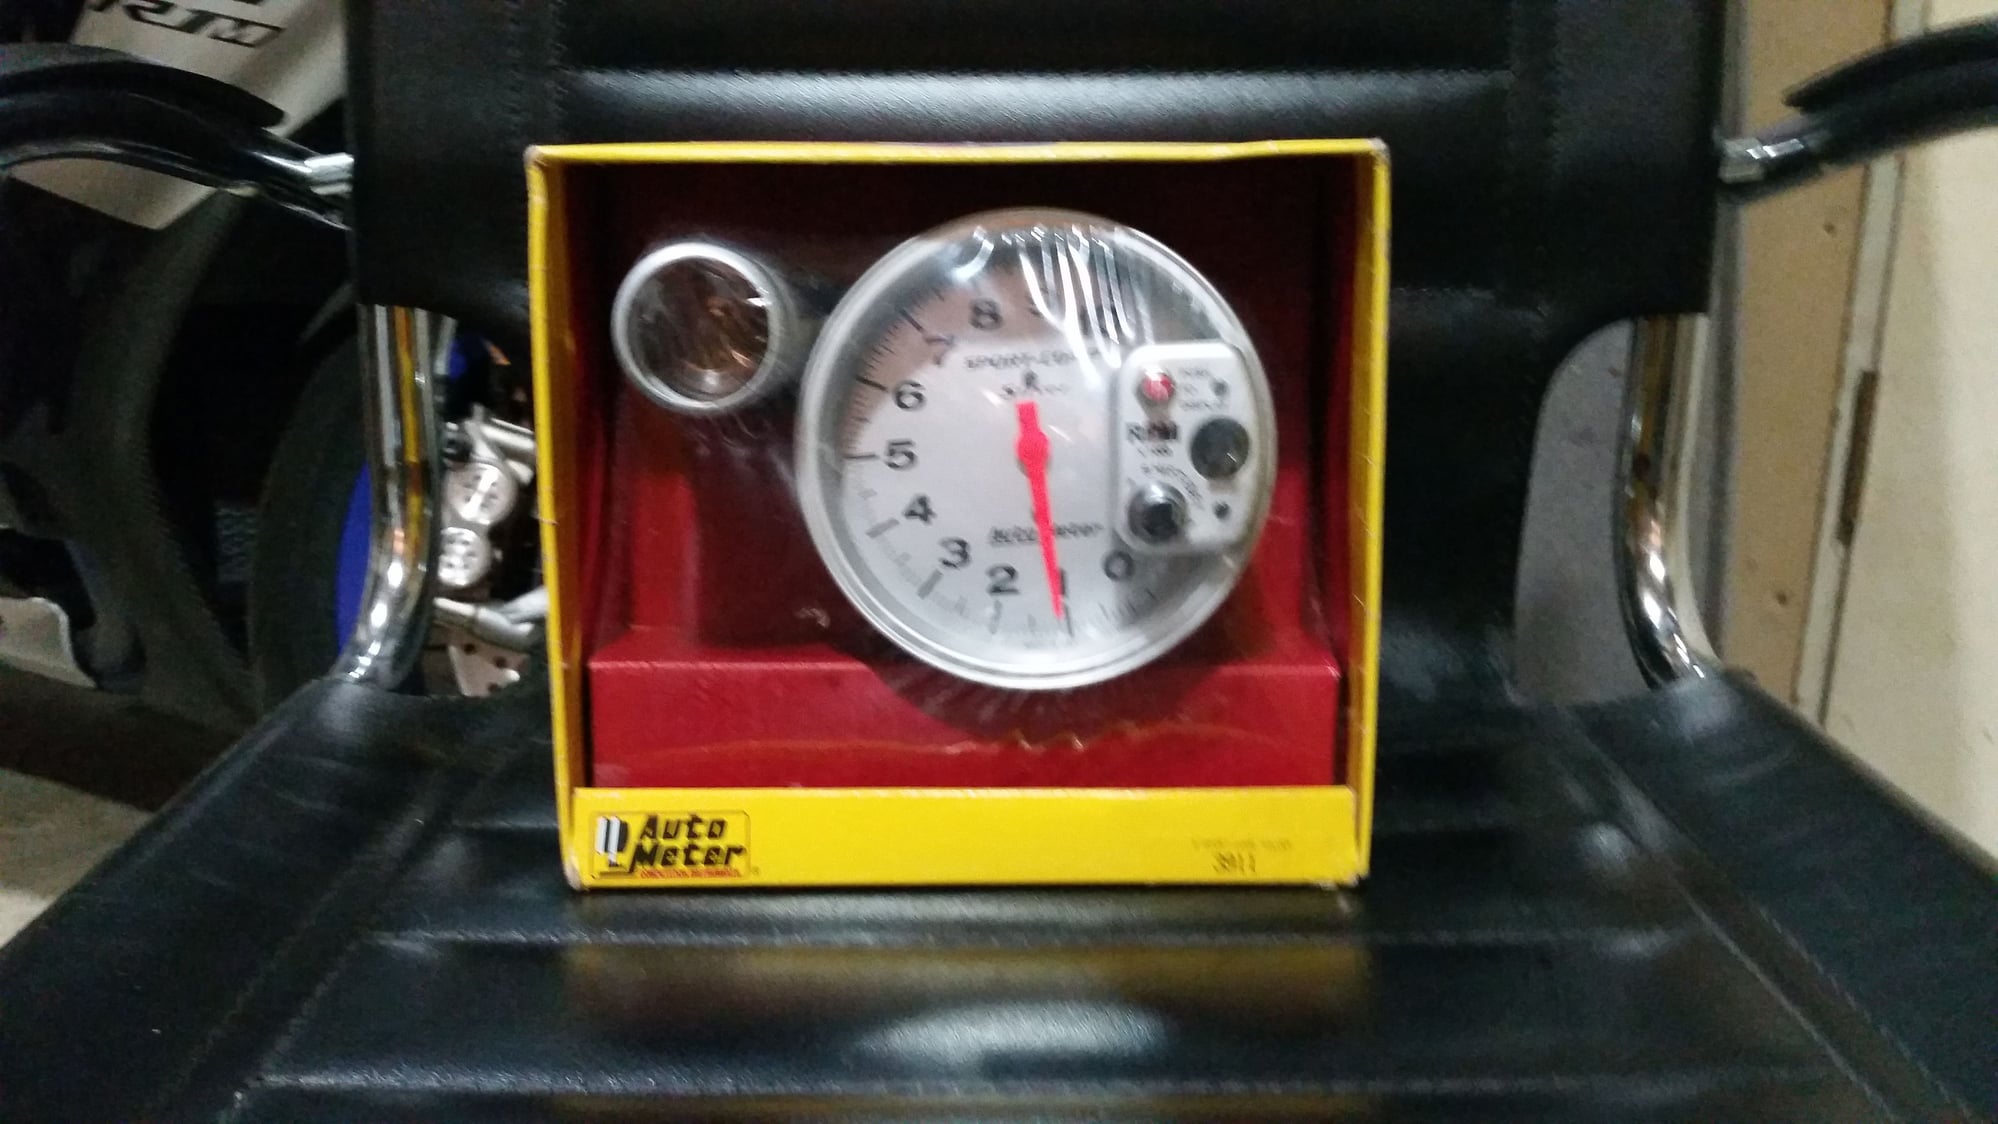  - Autometer 3911 Comp Silver Tachometer - Lewisville, TX 75067, United States